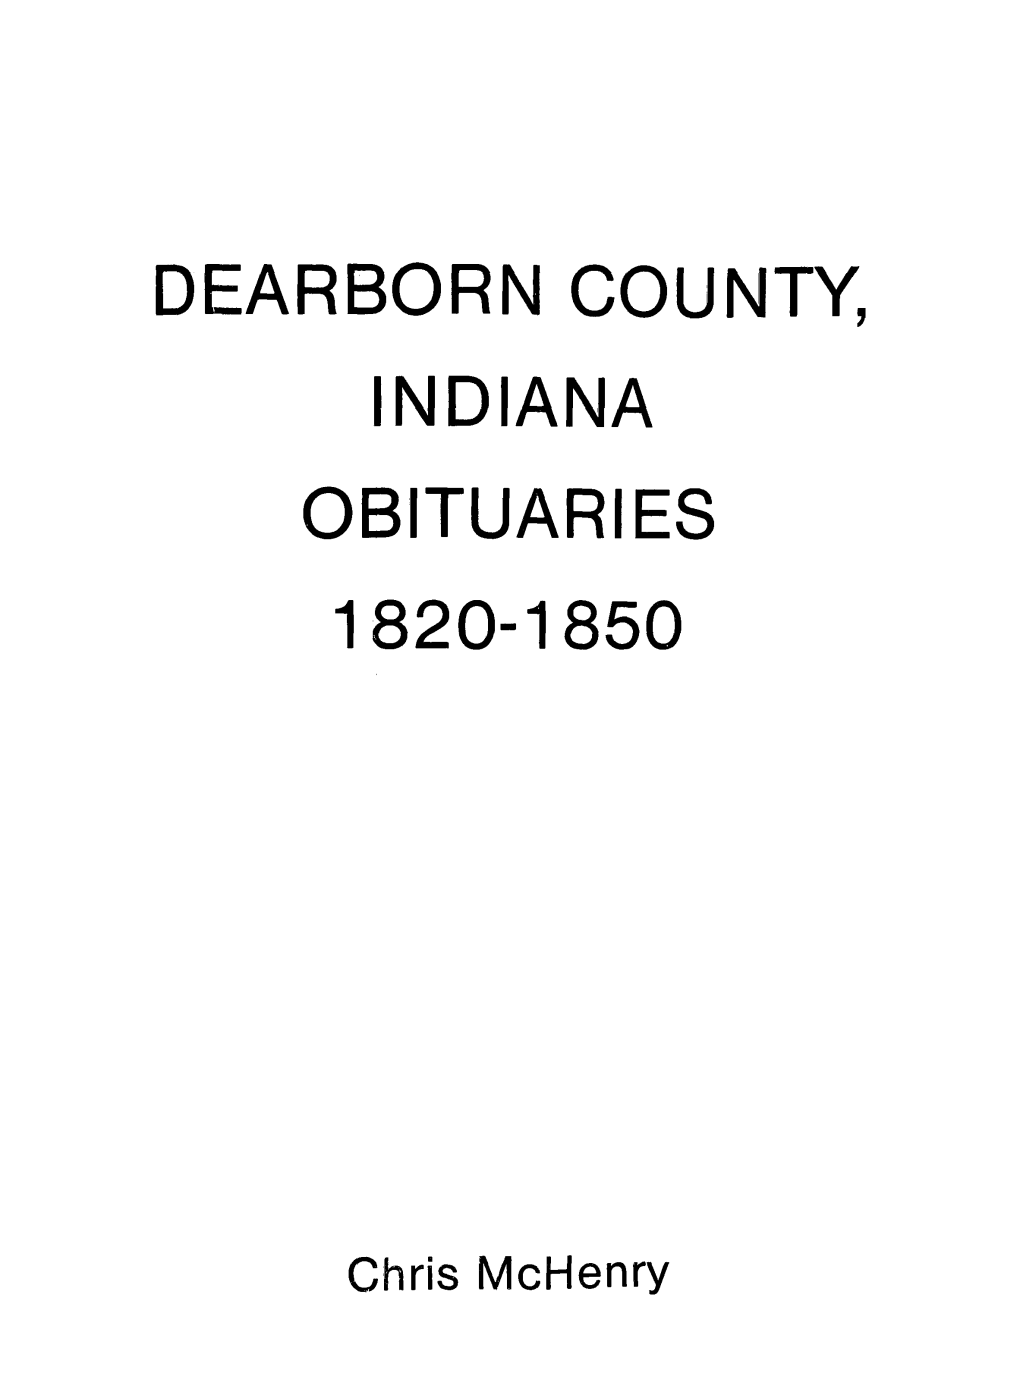 Dearborn County, Indiana Obituaries 1820-1850